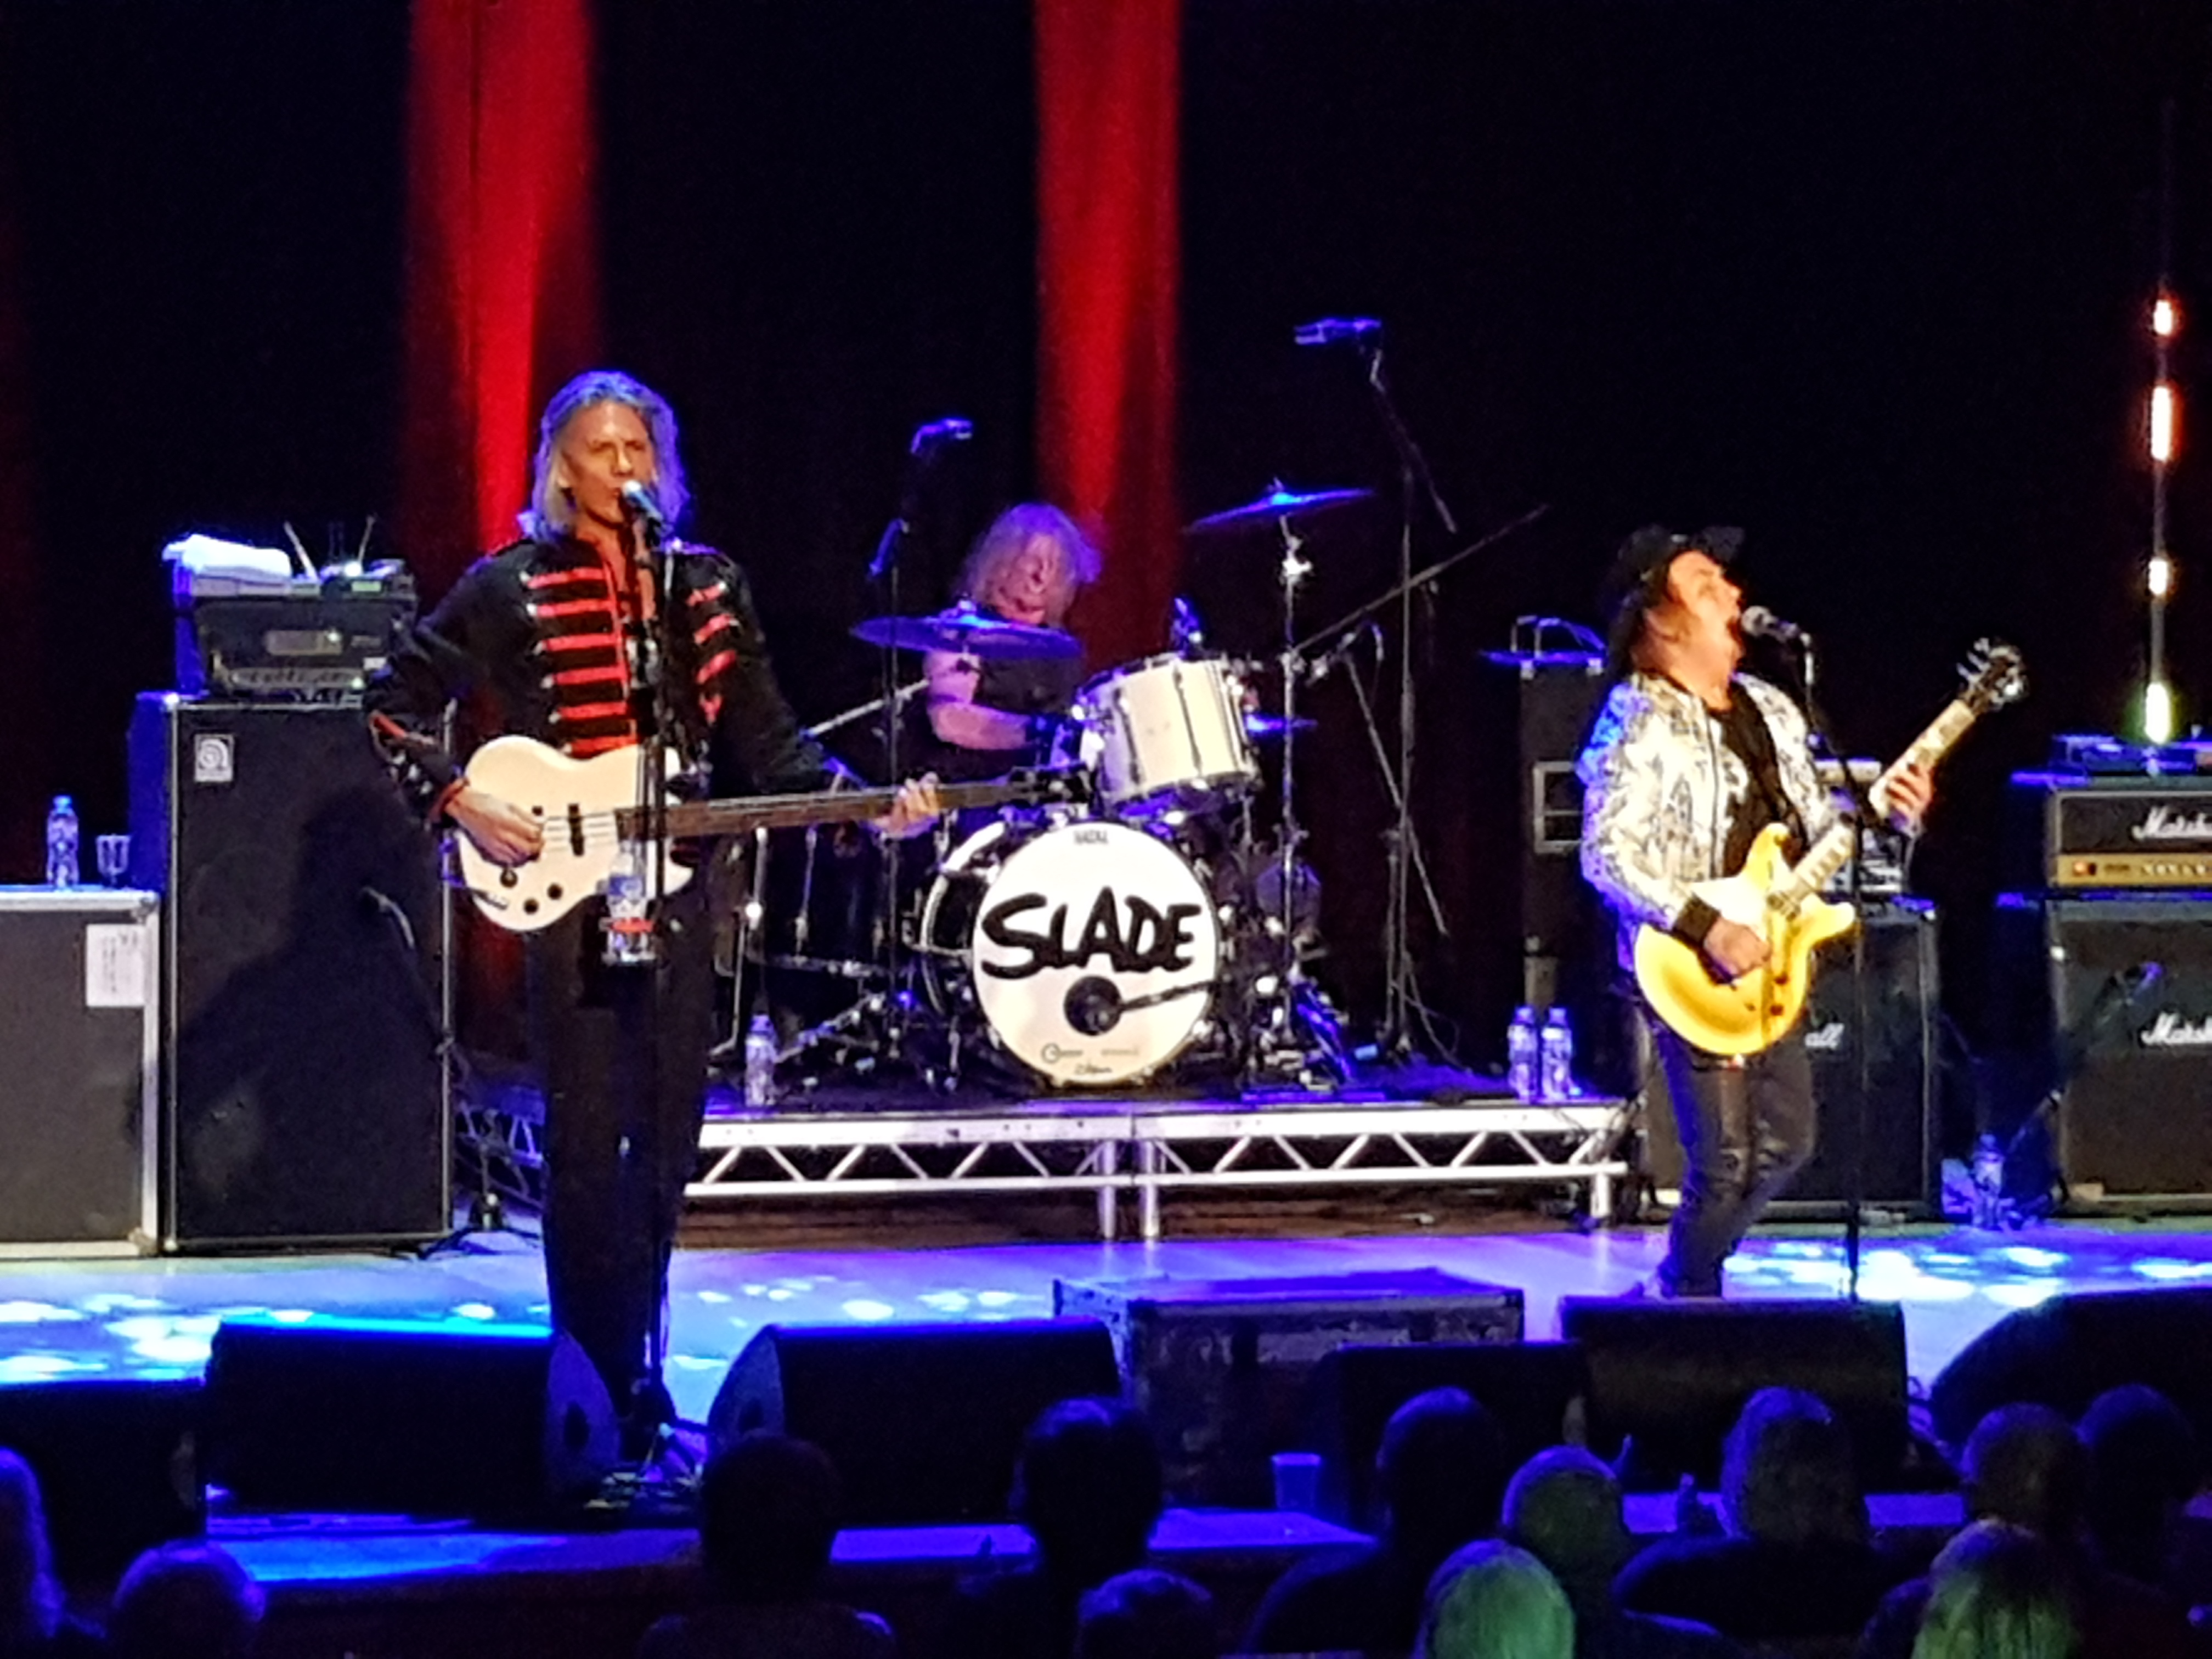 Slade are back on UK 2019 Tour and are playing at the O2 Bristol